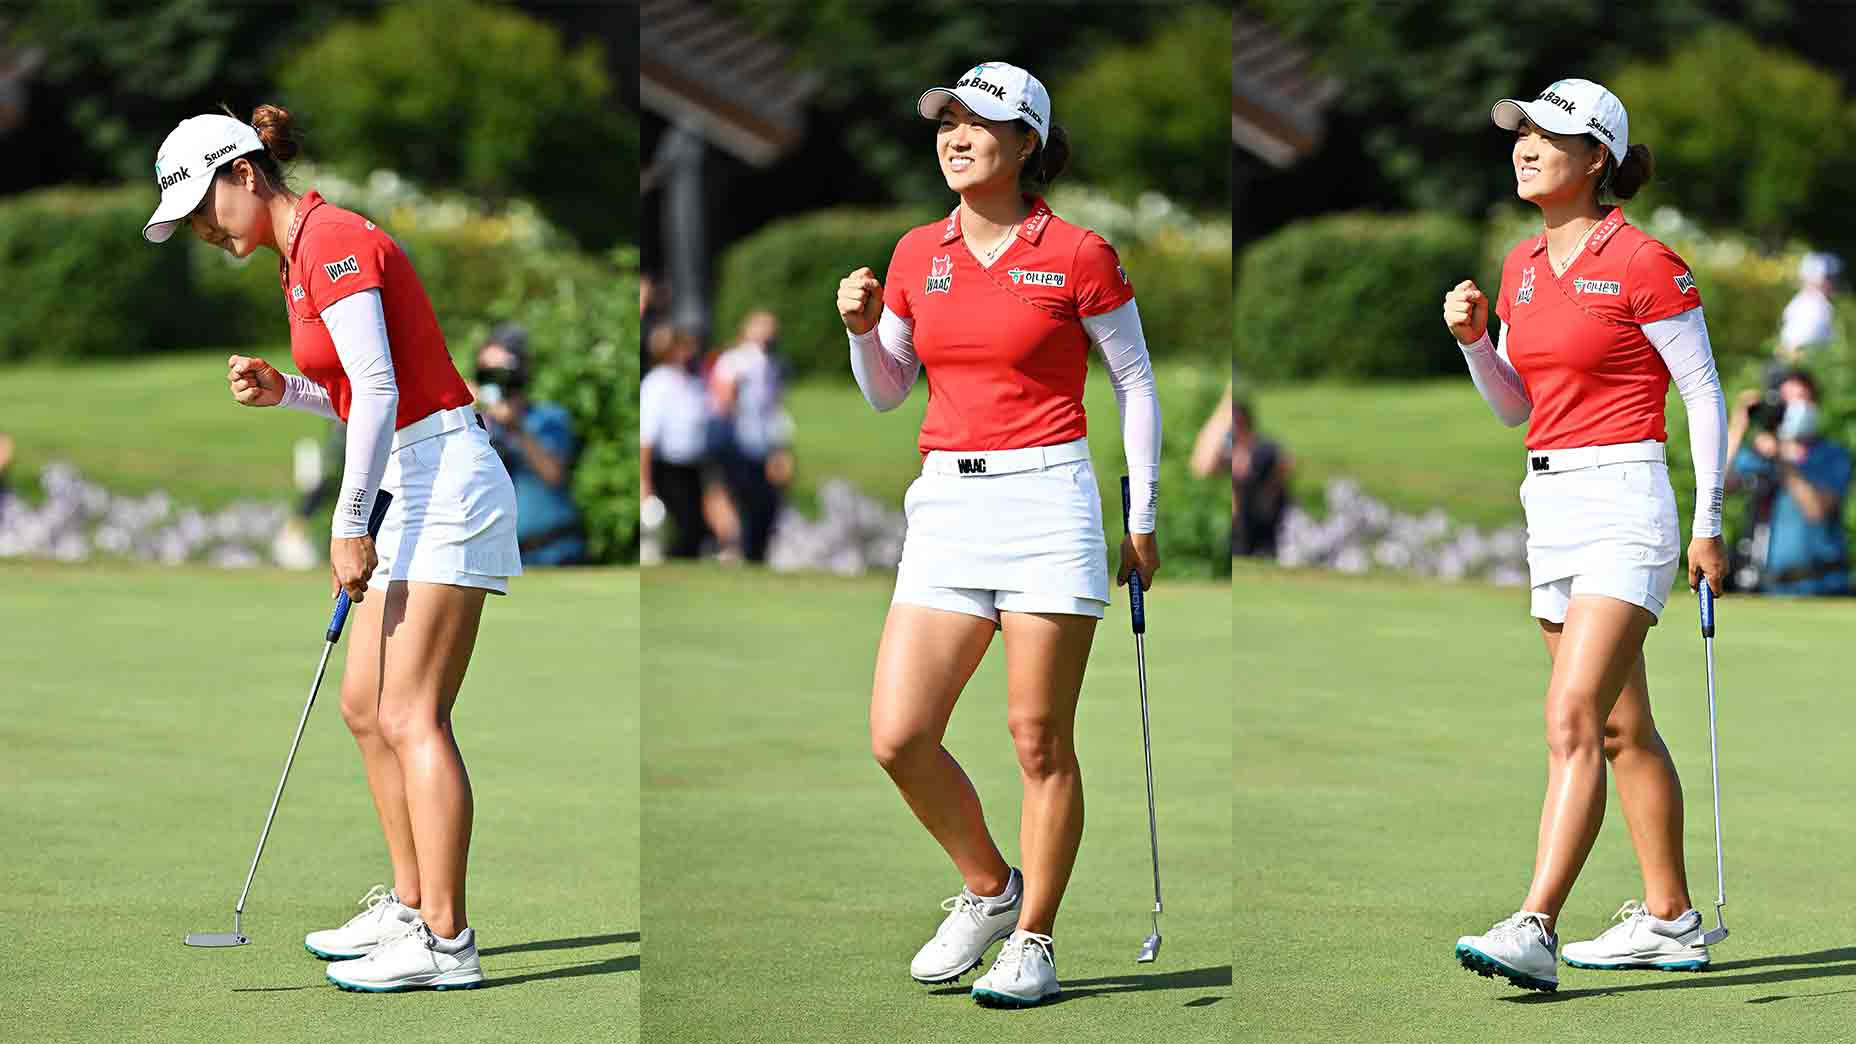 Minjee Lee wins Evian Championship after dramatic comeback, playoff